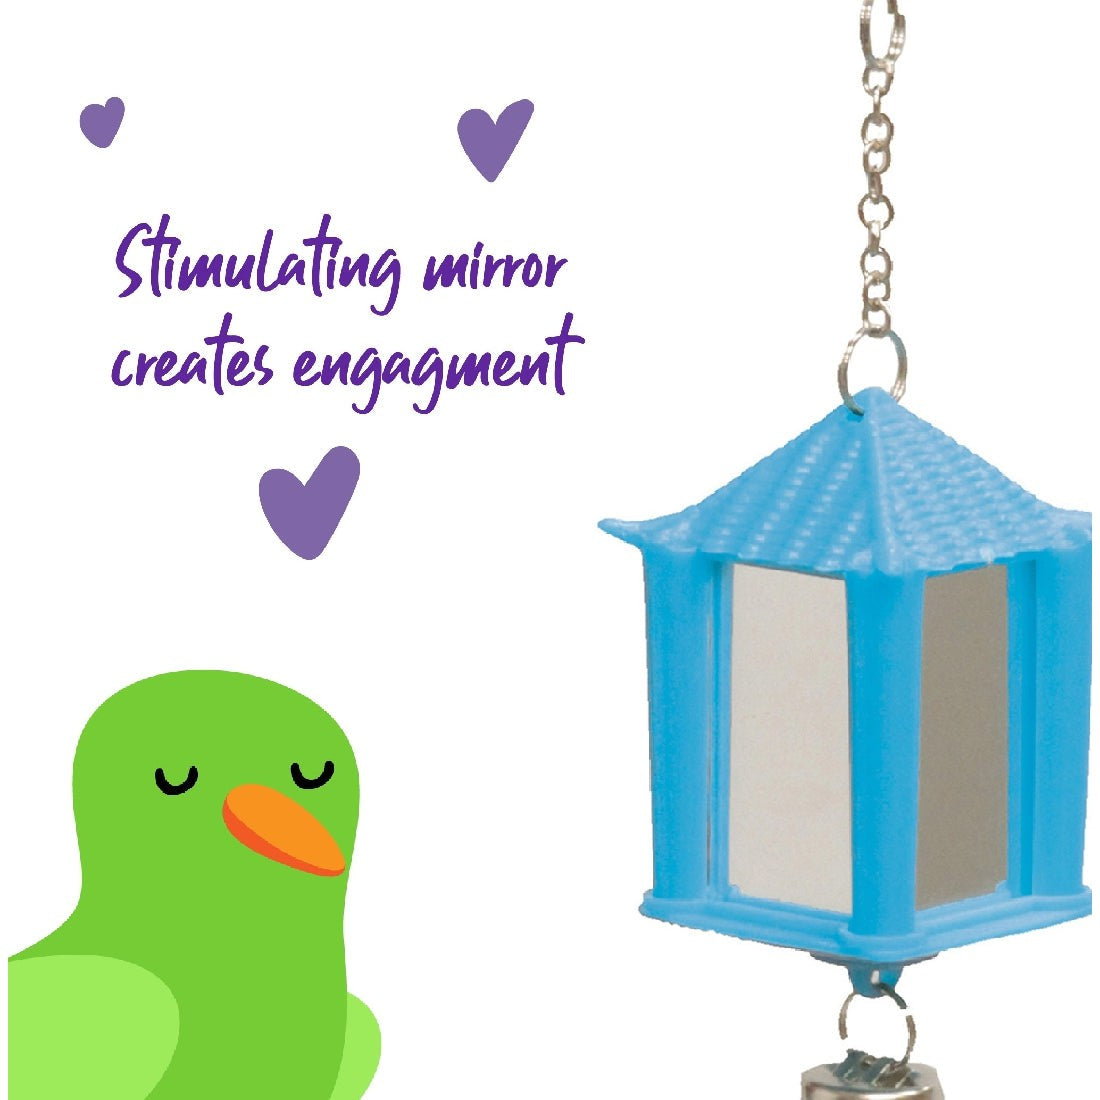 Alt: Bird toy with blue mirror and chain, captioned "Stimulating mirror creates engagement".